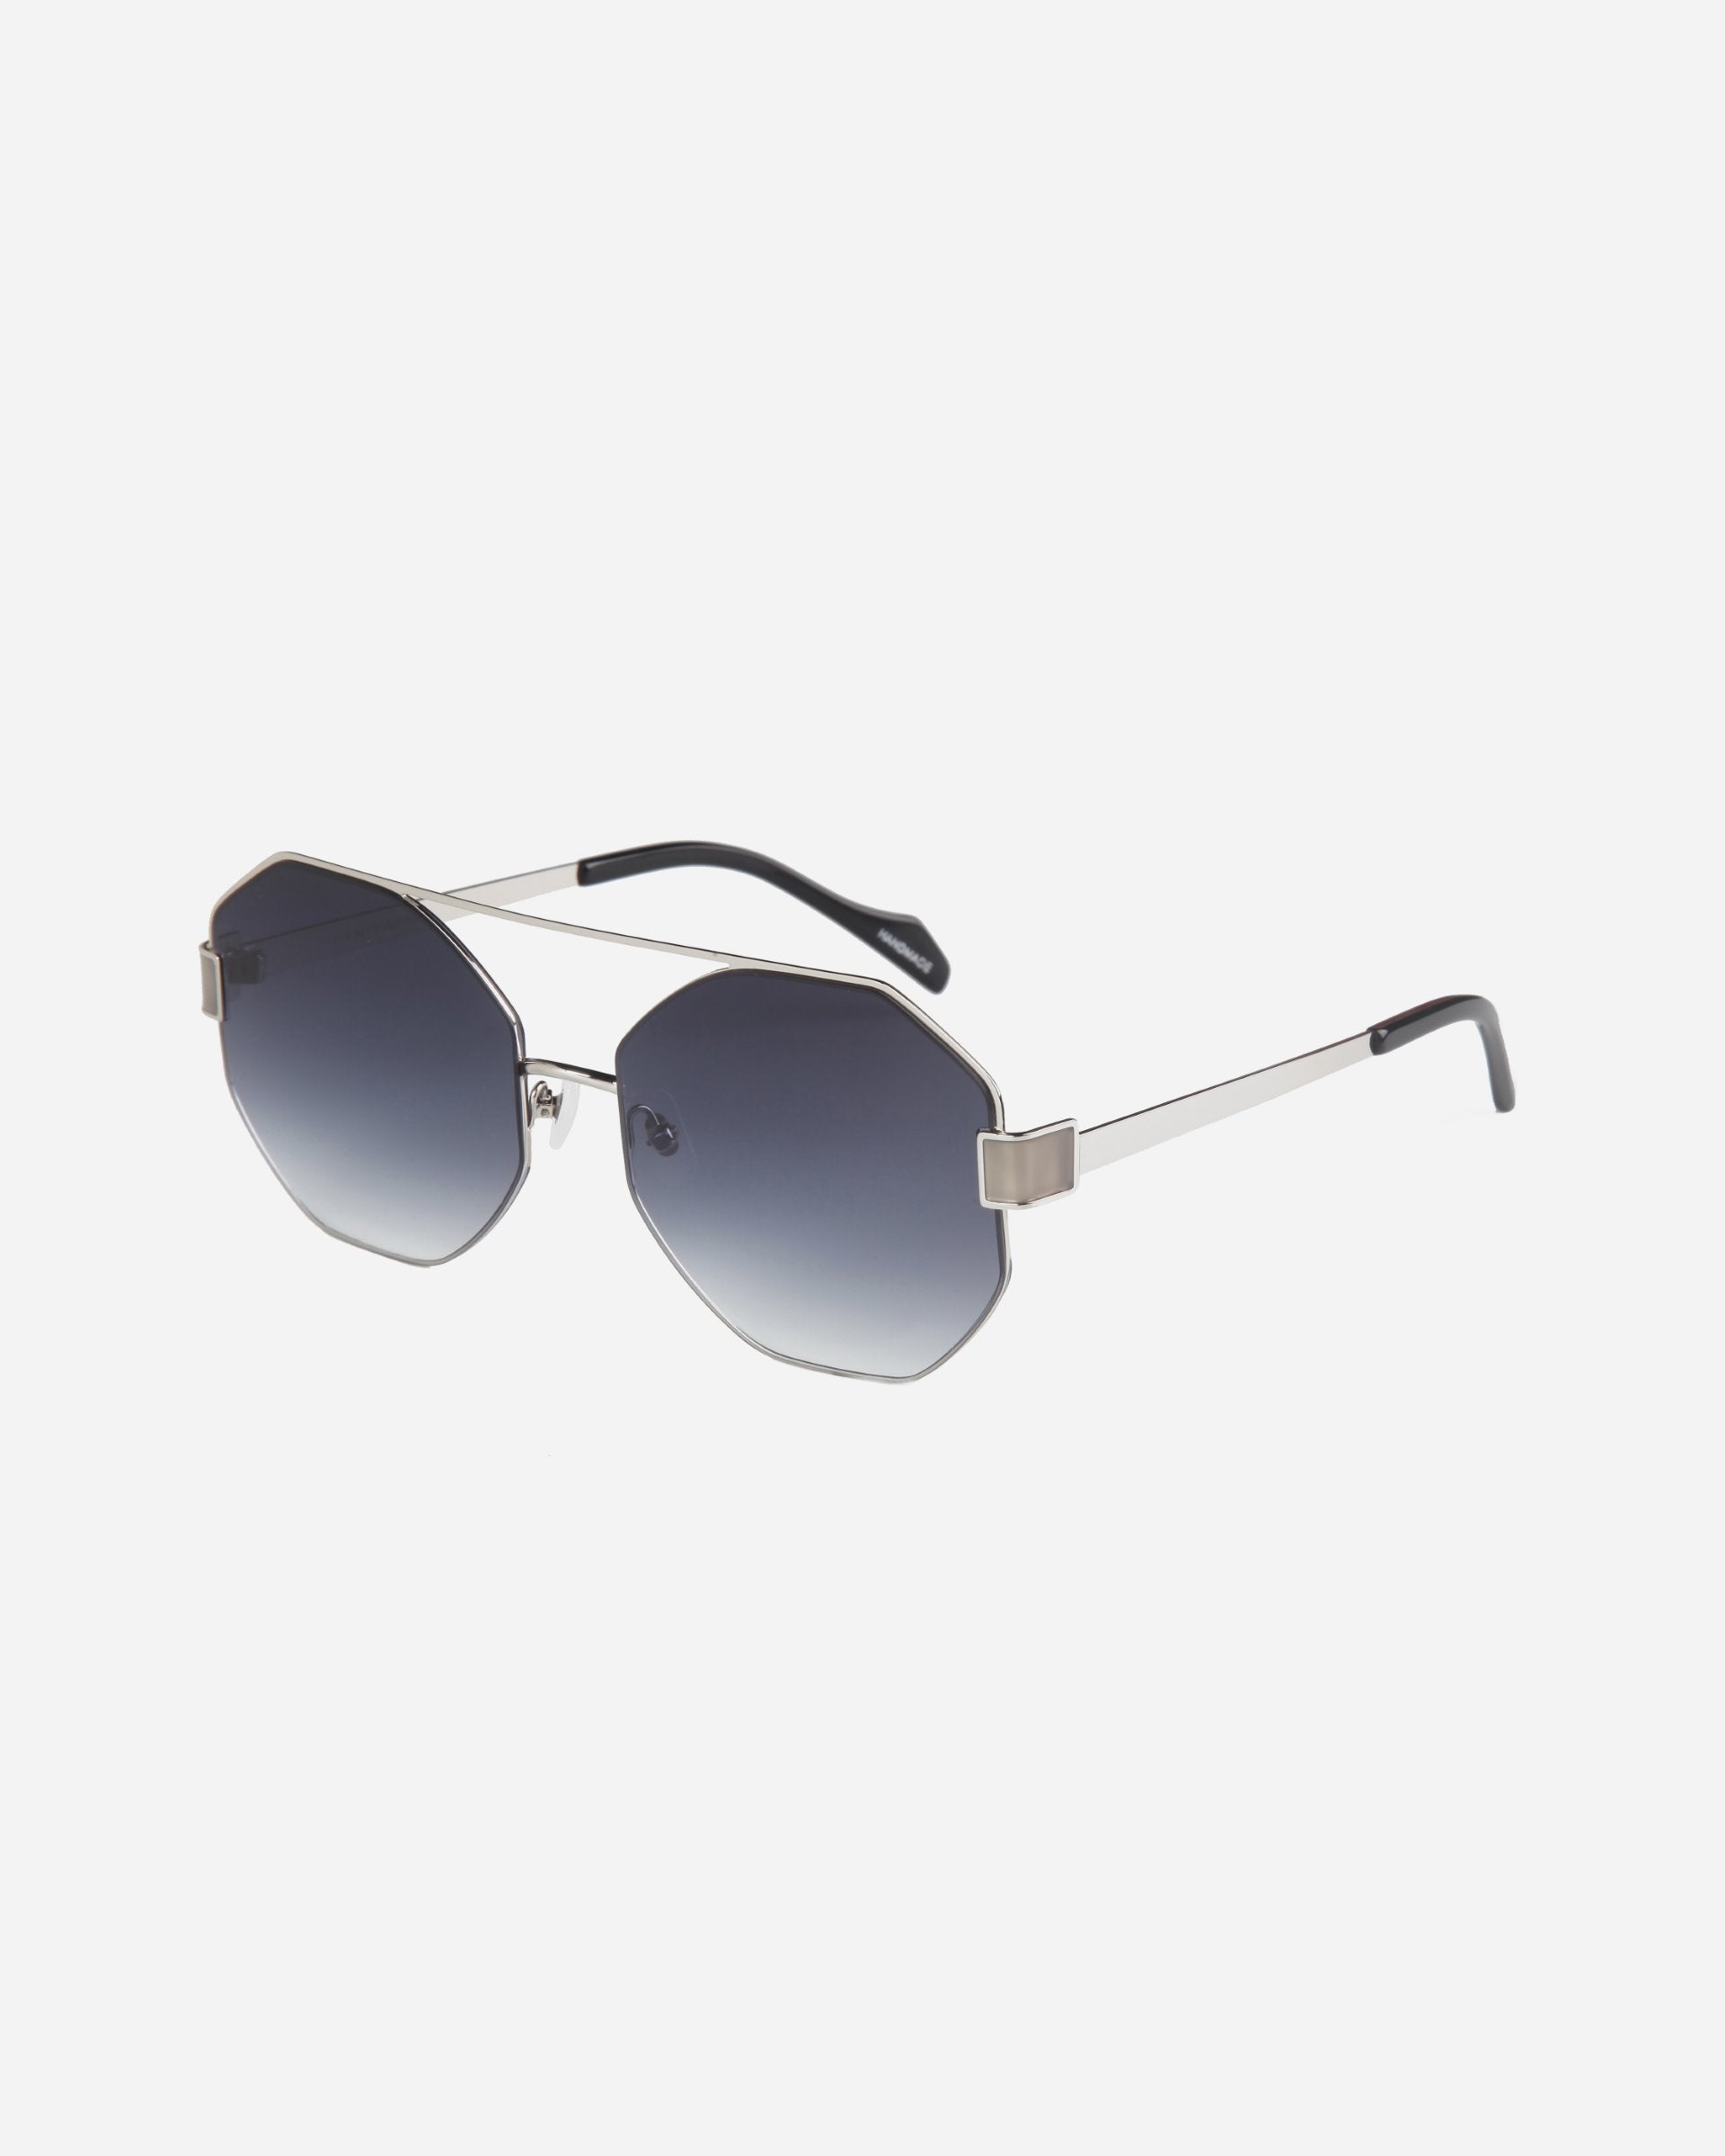 A pair of stylish For Art&#39;s Sake® Mania sunglasses with octagonal nylon lenses featuring a gradient tint from dark at the top to lighter at the bottom. The stainless steel frame boasts a sleek, minimalist design, and the temples are thin with black tips. Adjustable nosepads ensure a comfortable fit for all-day wear.